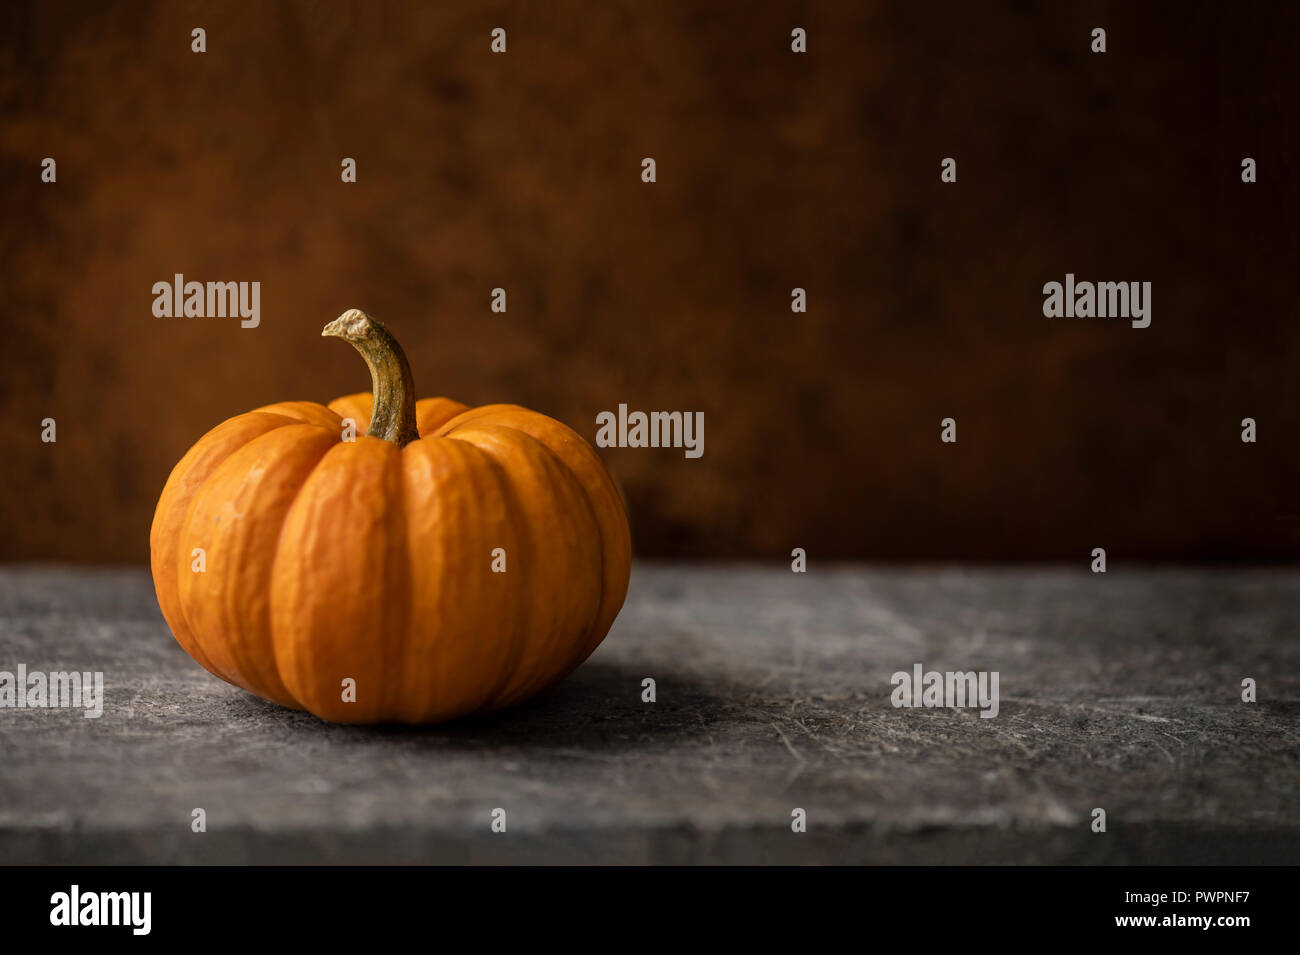 Mini orange pumpkin on a warn stone surface with rustic, brown, leather background. Moody natural lighting. Stock Photo